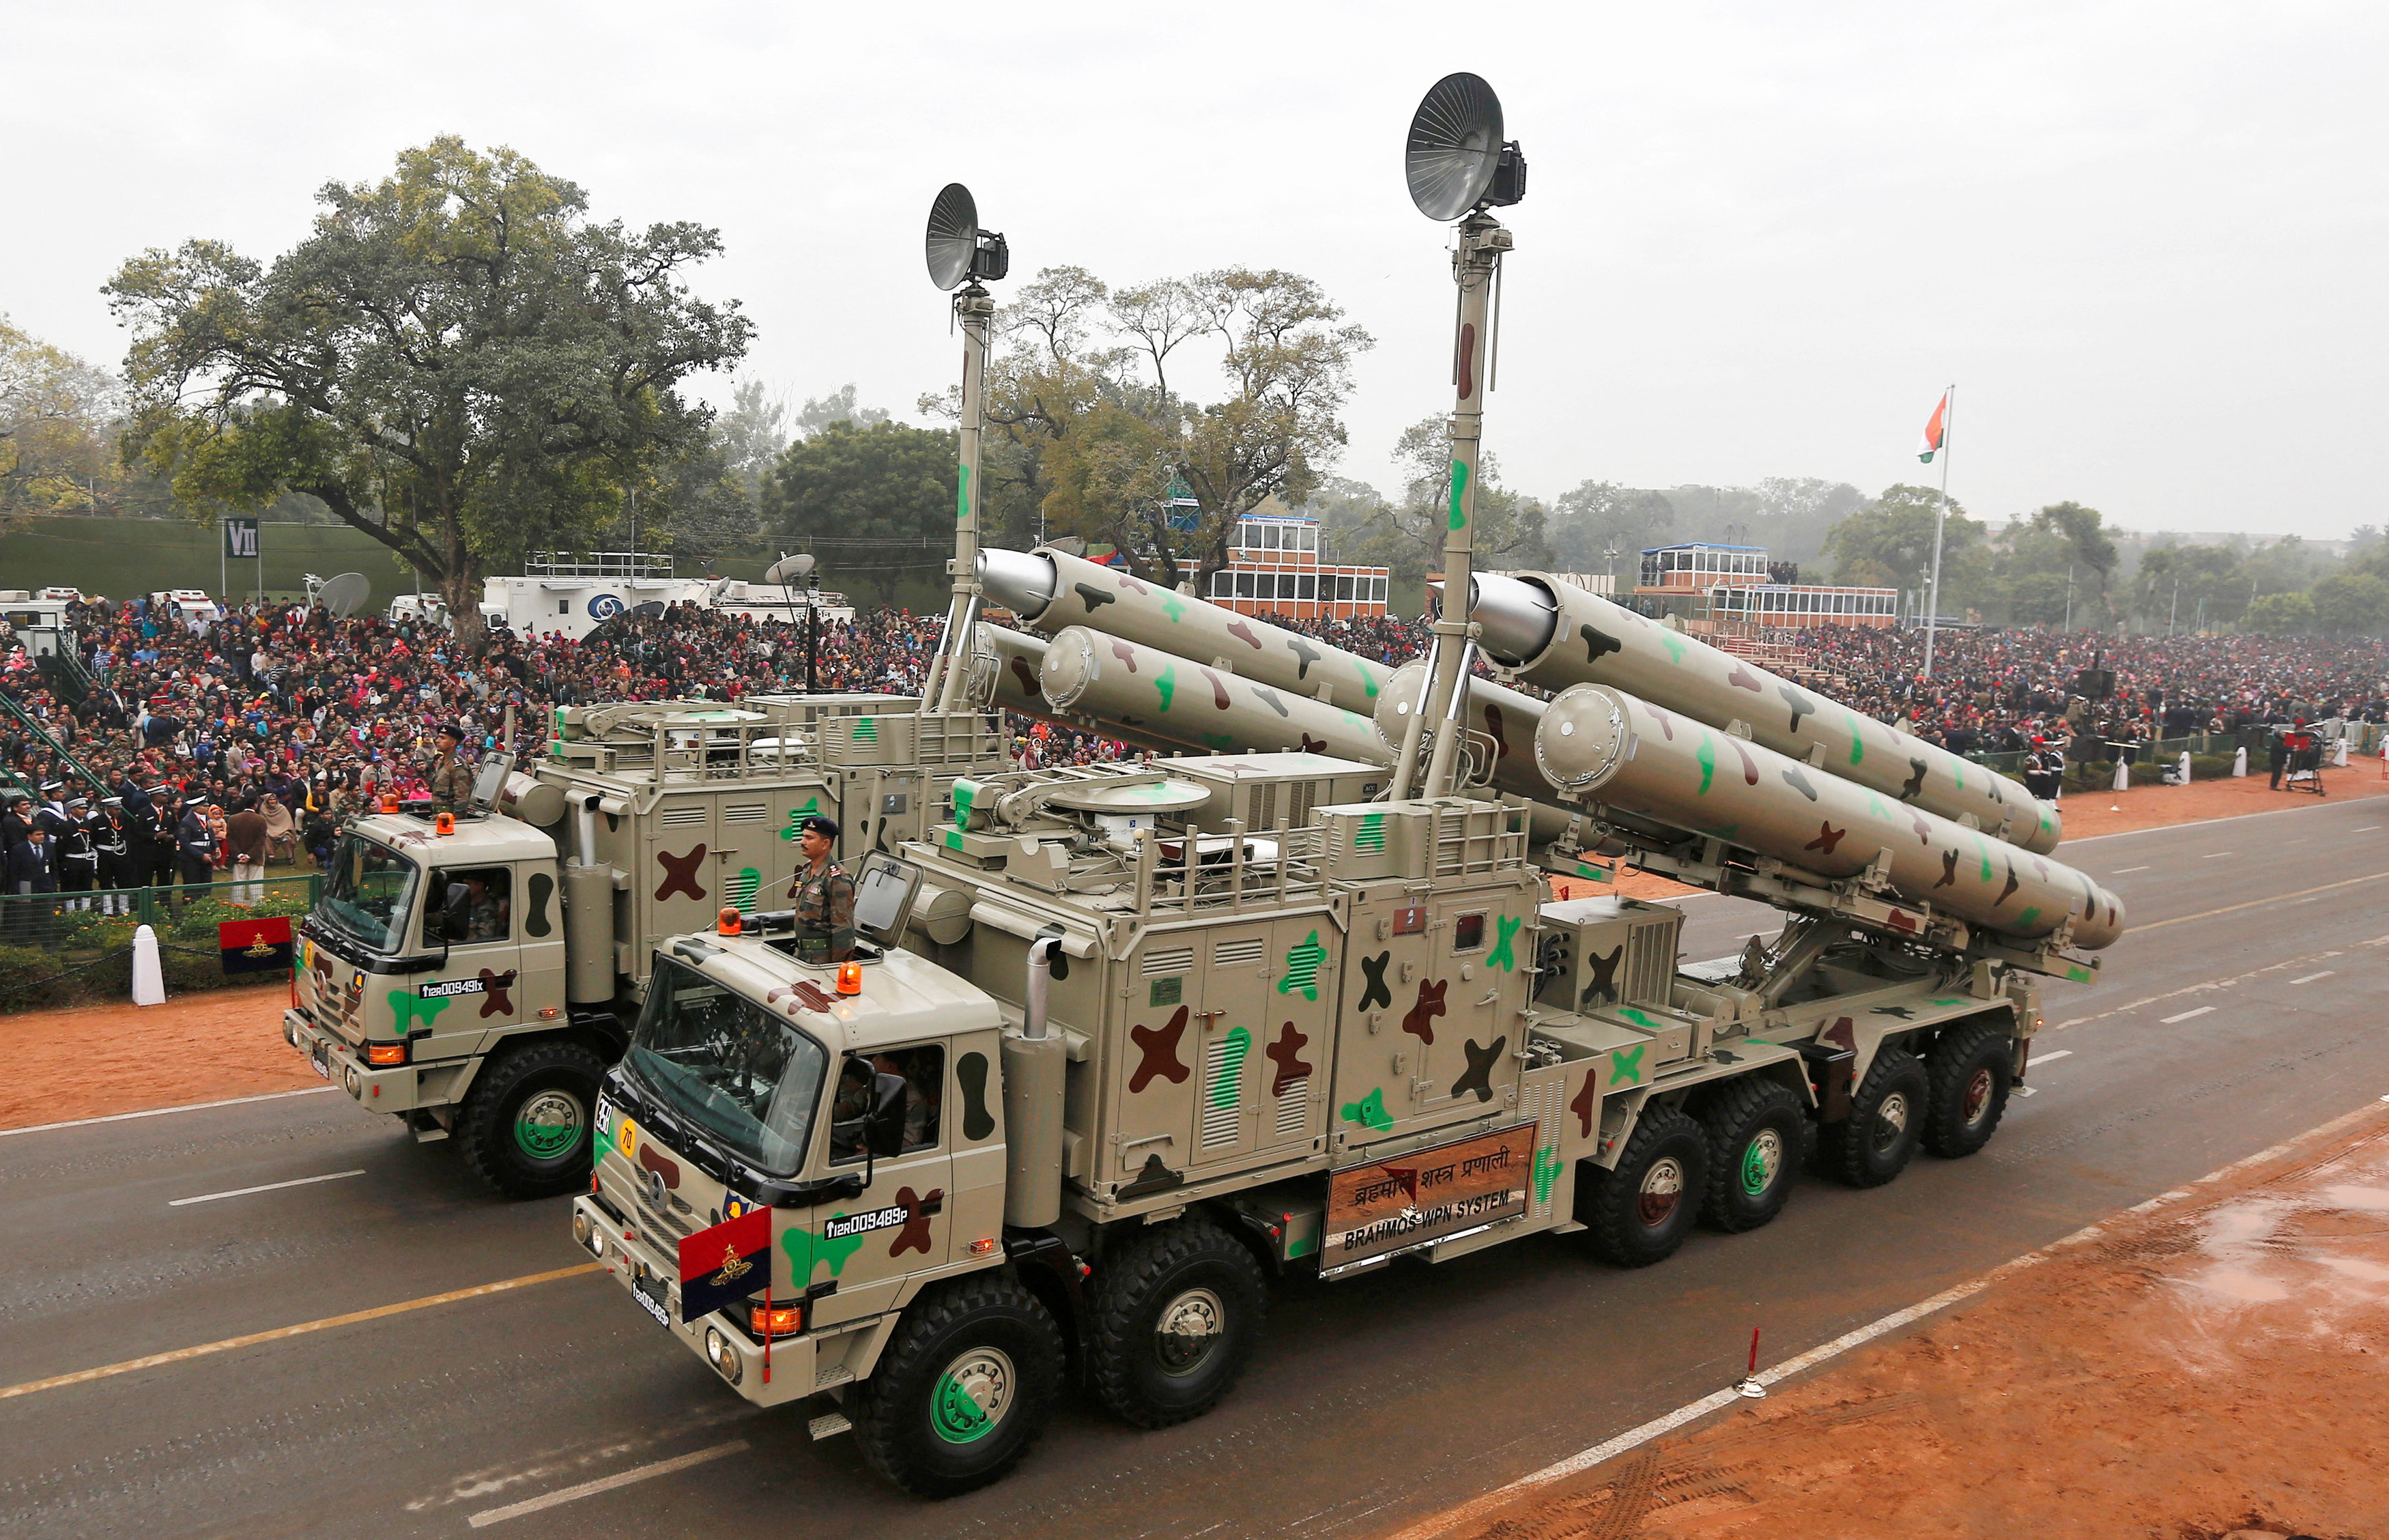 Indian Army's BrahMos weapon systems are displayed during a full dress rehearsal for the Republic Day parade in New Delhi